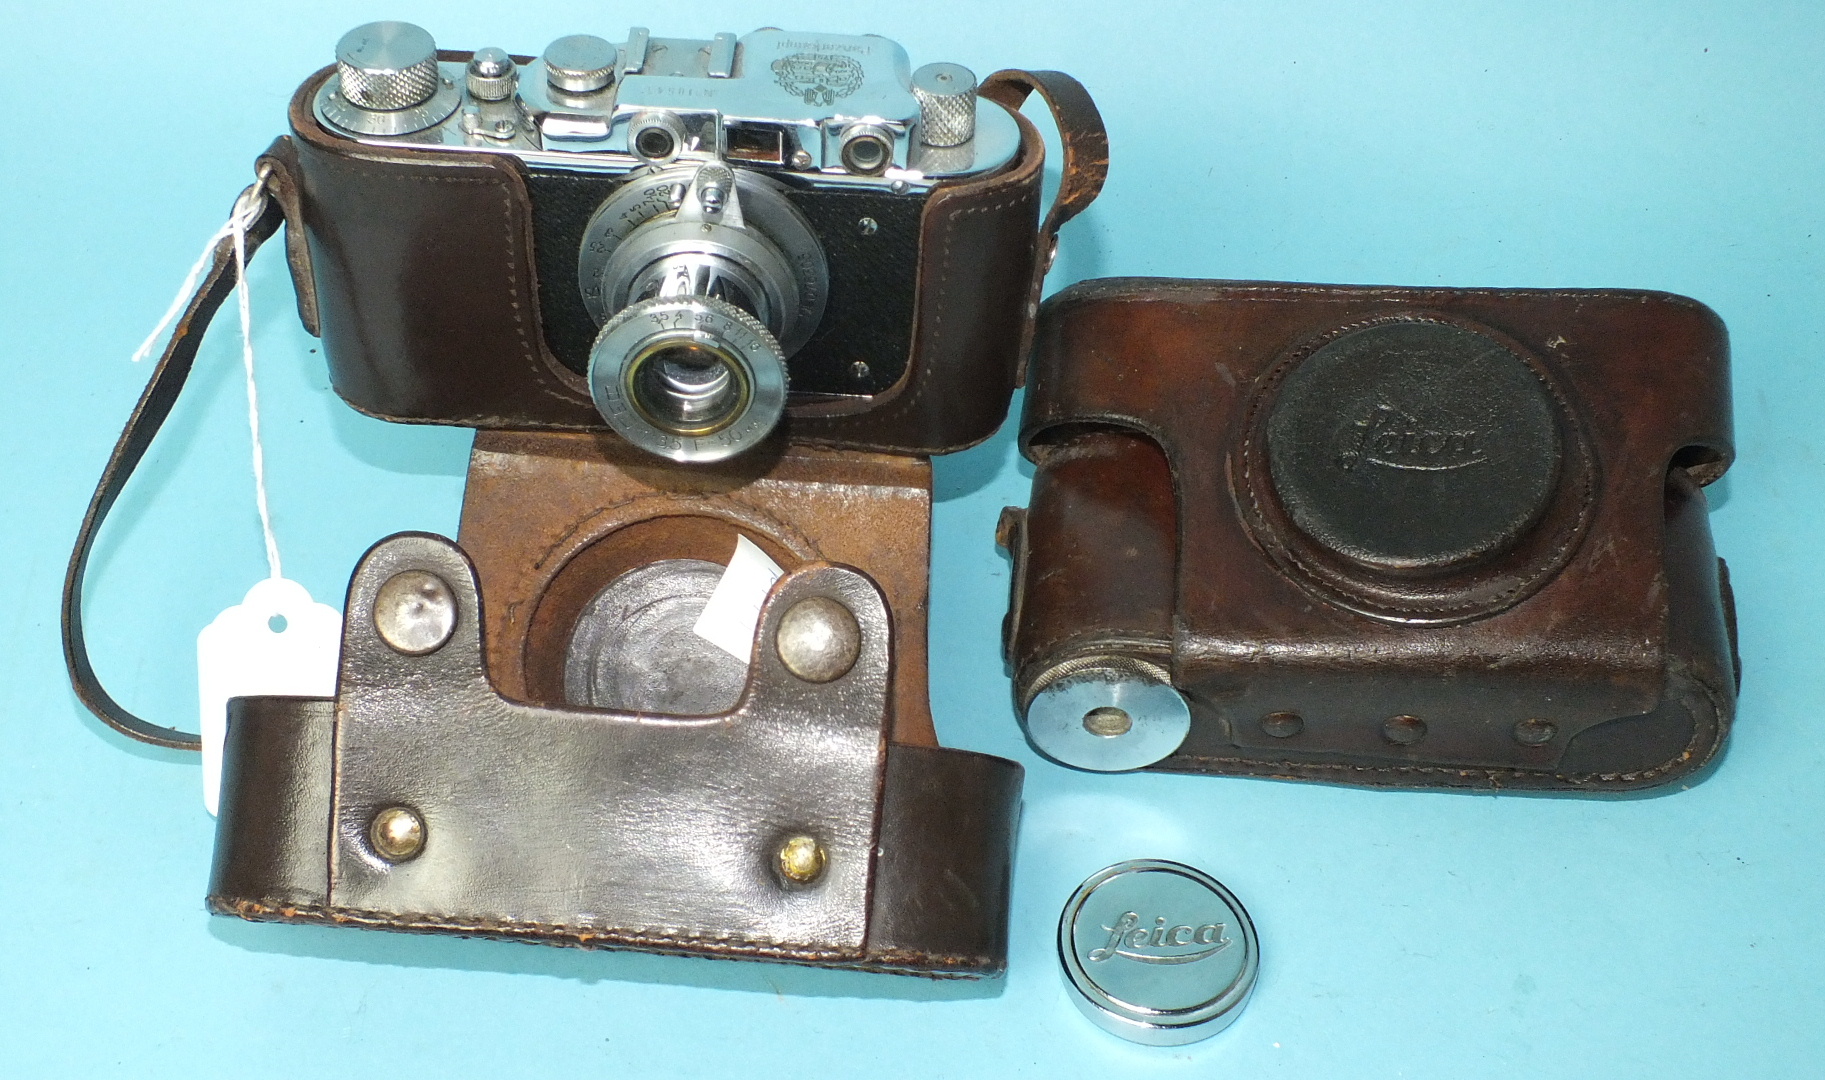 A Russian copy of a Leica II camera with "Panzerkampf" insignia, numbered 10543, in leather case and